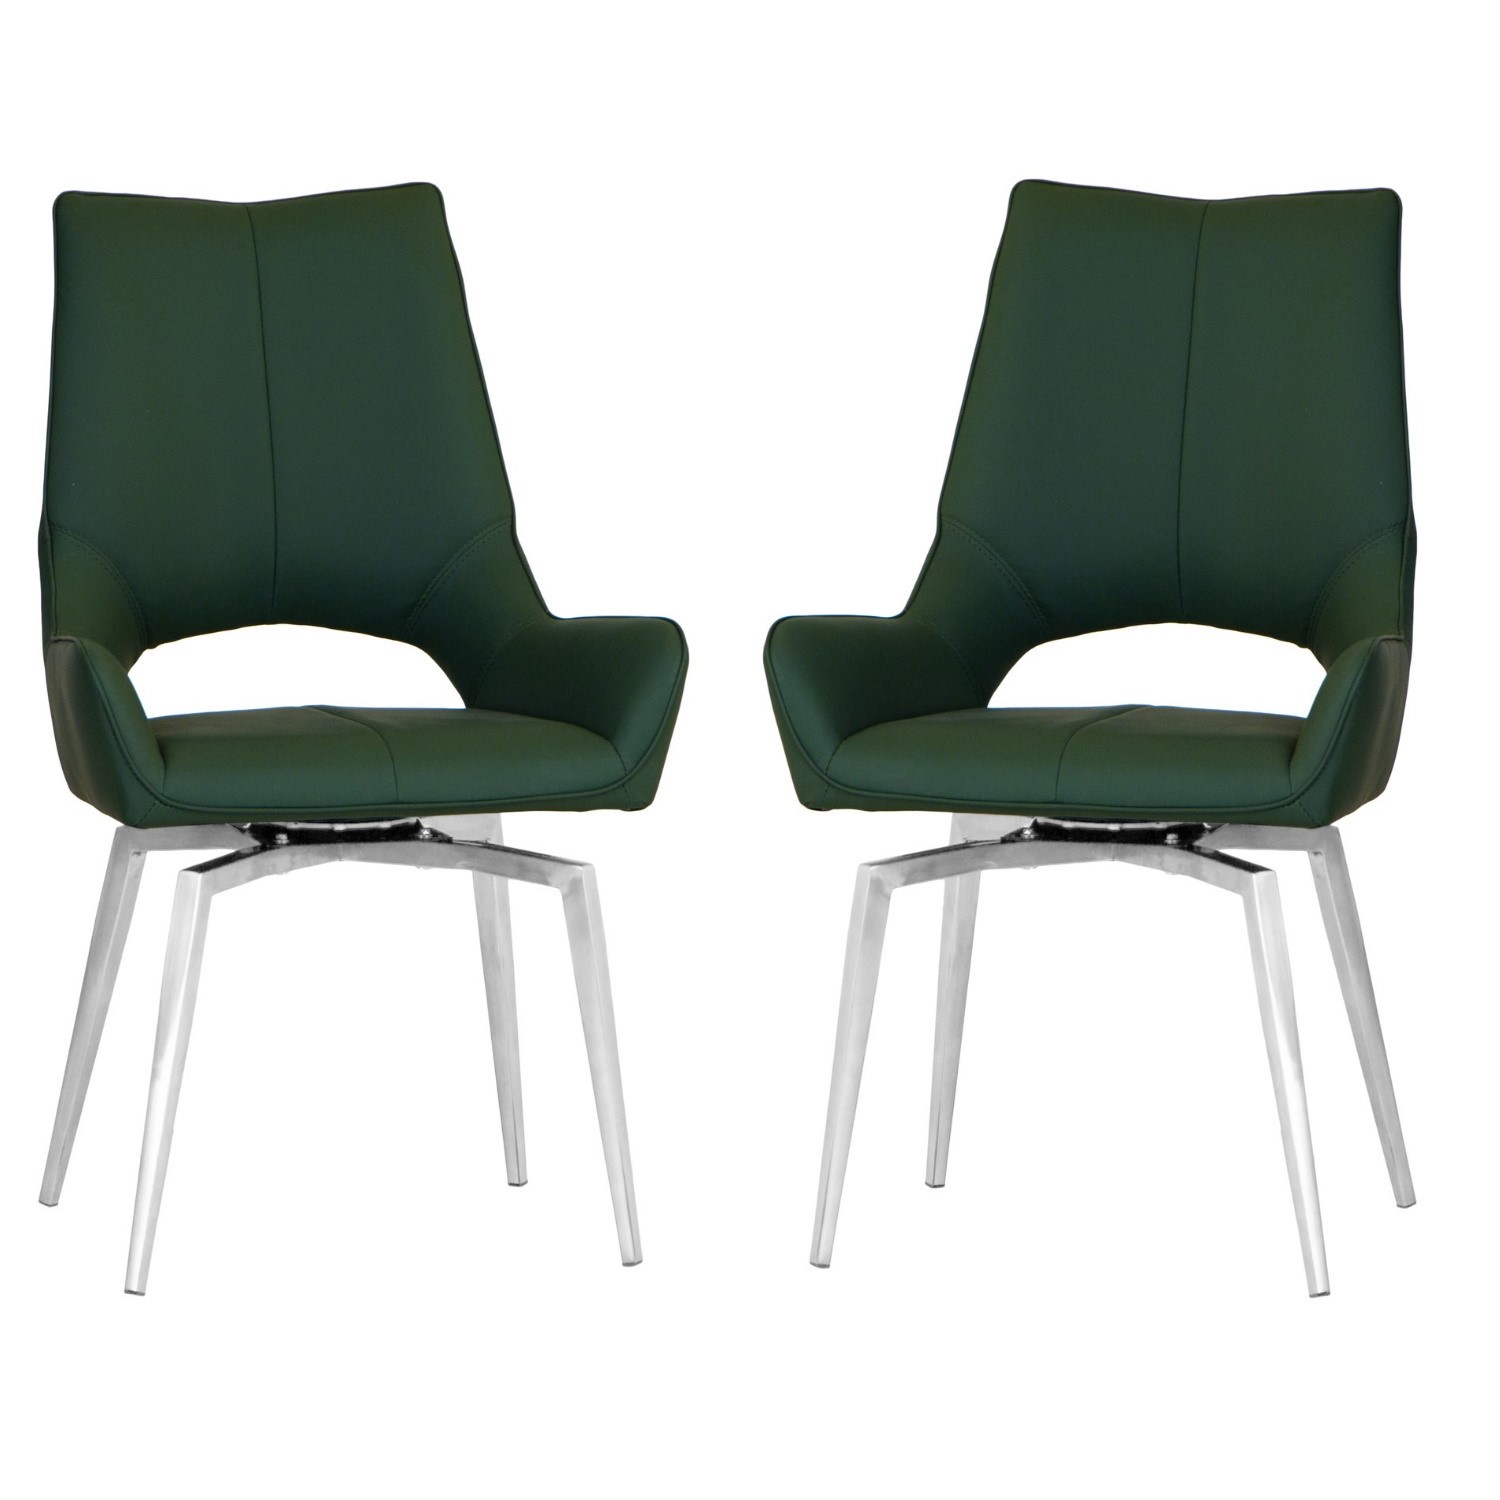 Photo of Revel set of 2 swivel dining chairs - green